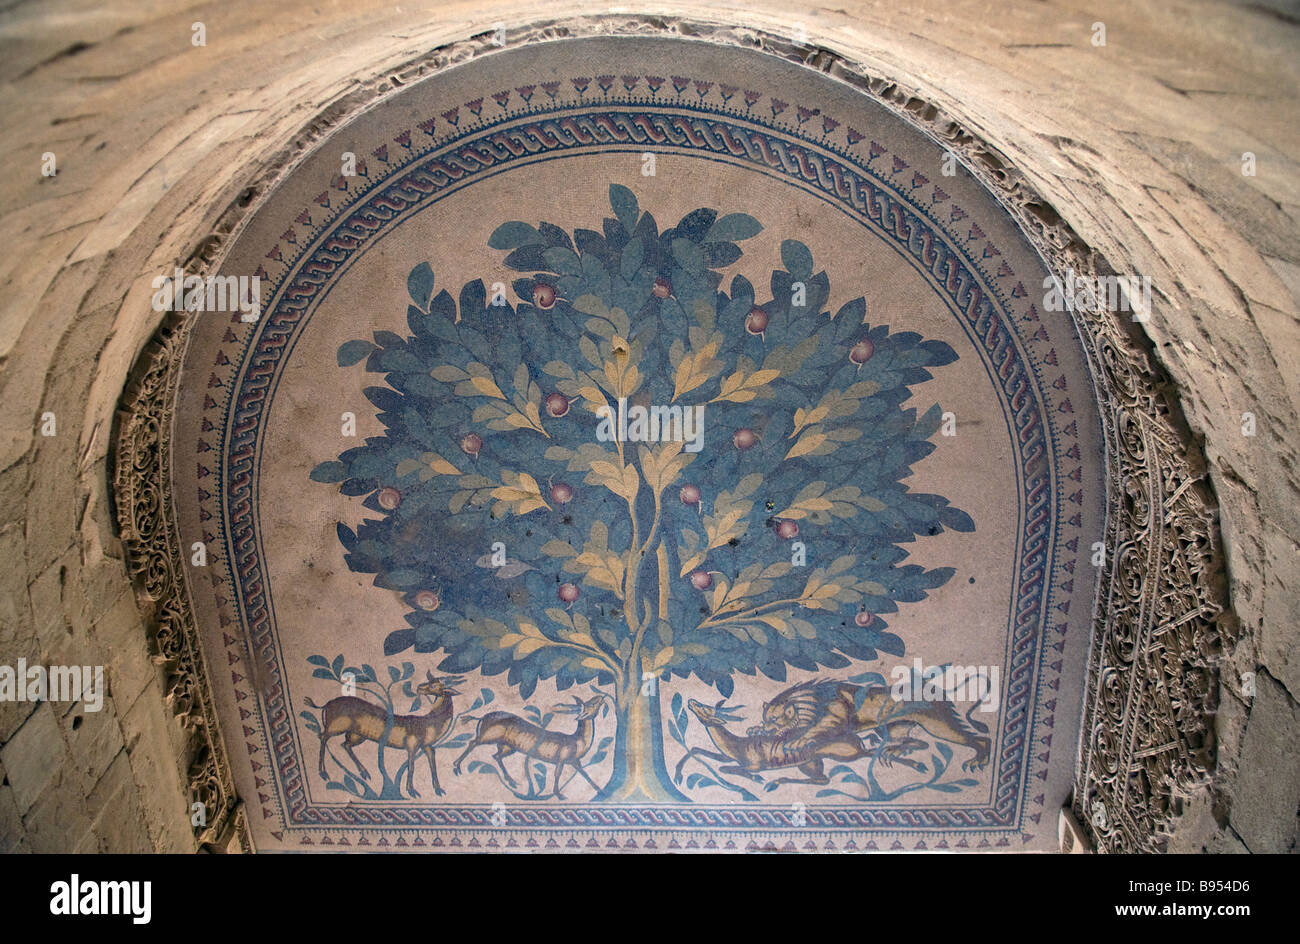 'Tree of Life' mosaic in the bath complex at Khirbat al-Mafjar known as Hisham's Palace an early Islamic archaeological site near Jericho, in Israel Stock Photo